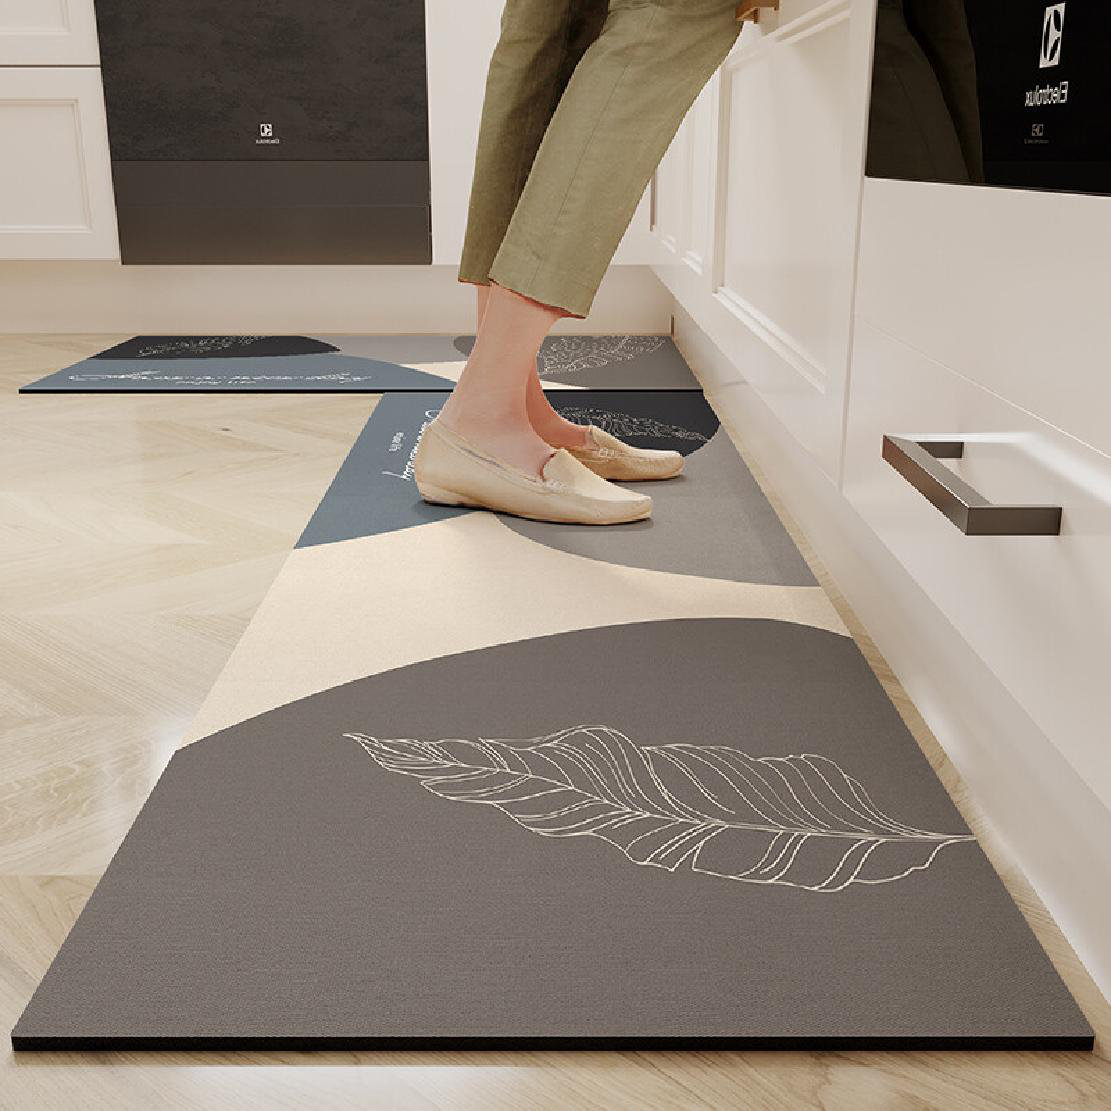 Marble kitchen floor mat, comfortable standing cushion, anti fatigue  kitchen mat - waterproof, easy to clean, and anti slip mat - AliExpress